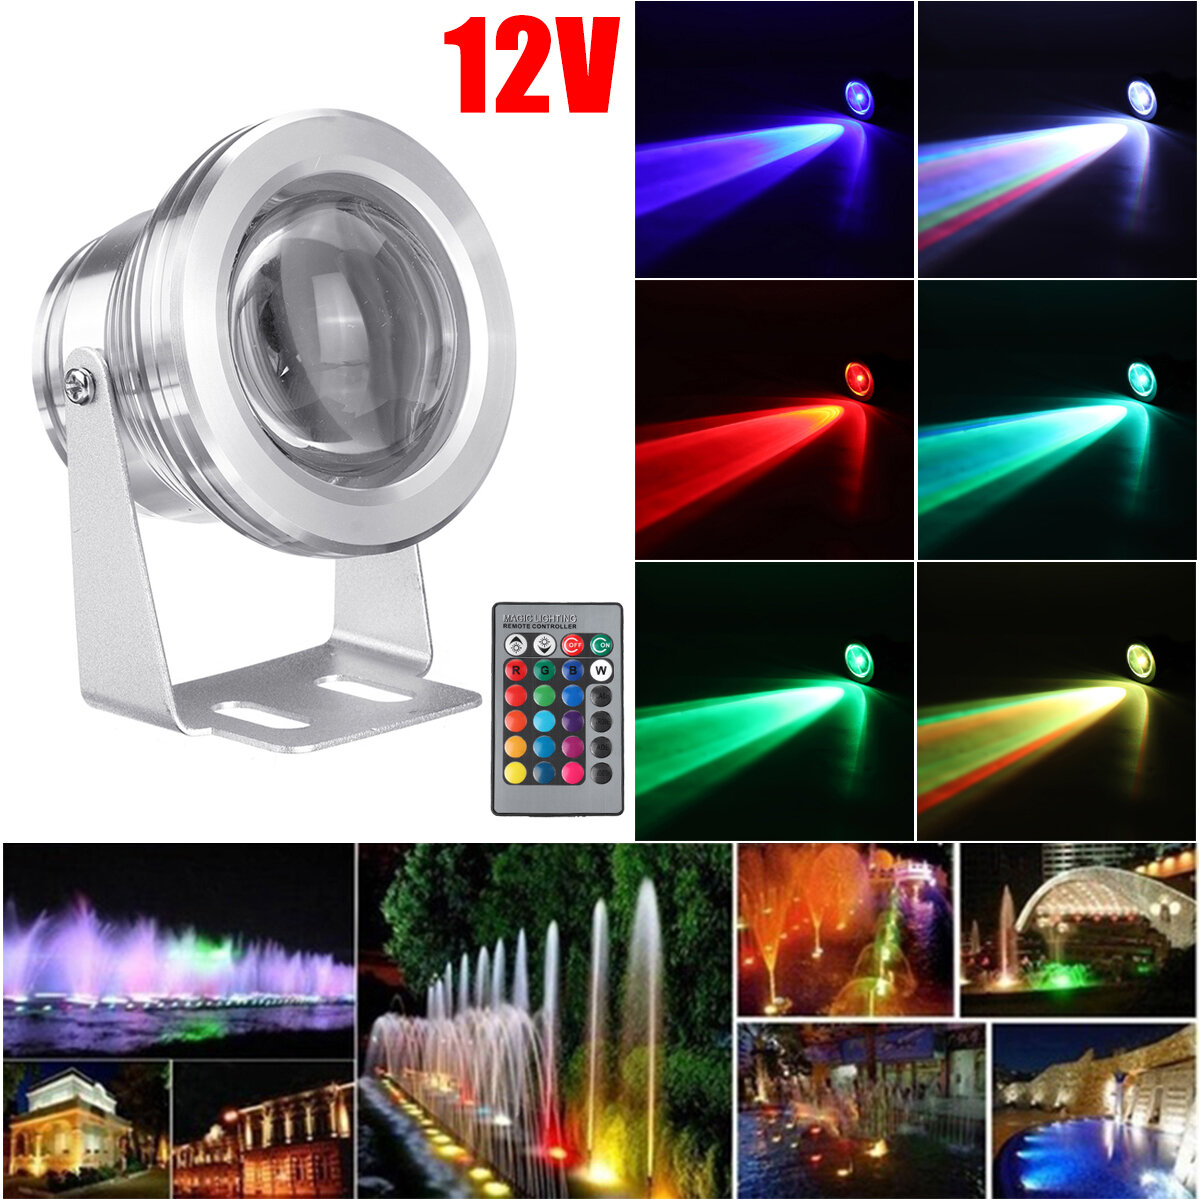 DC12V 10W RGB LED Underwater Light Waterproof Fountain Pool Spotlight With Remote Control